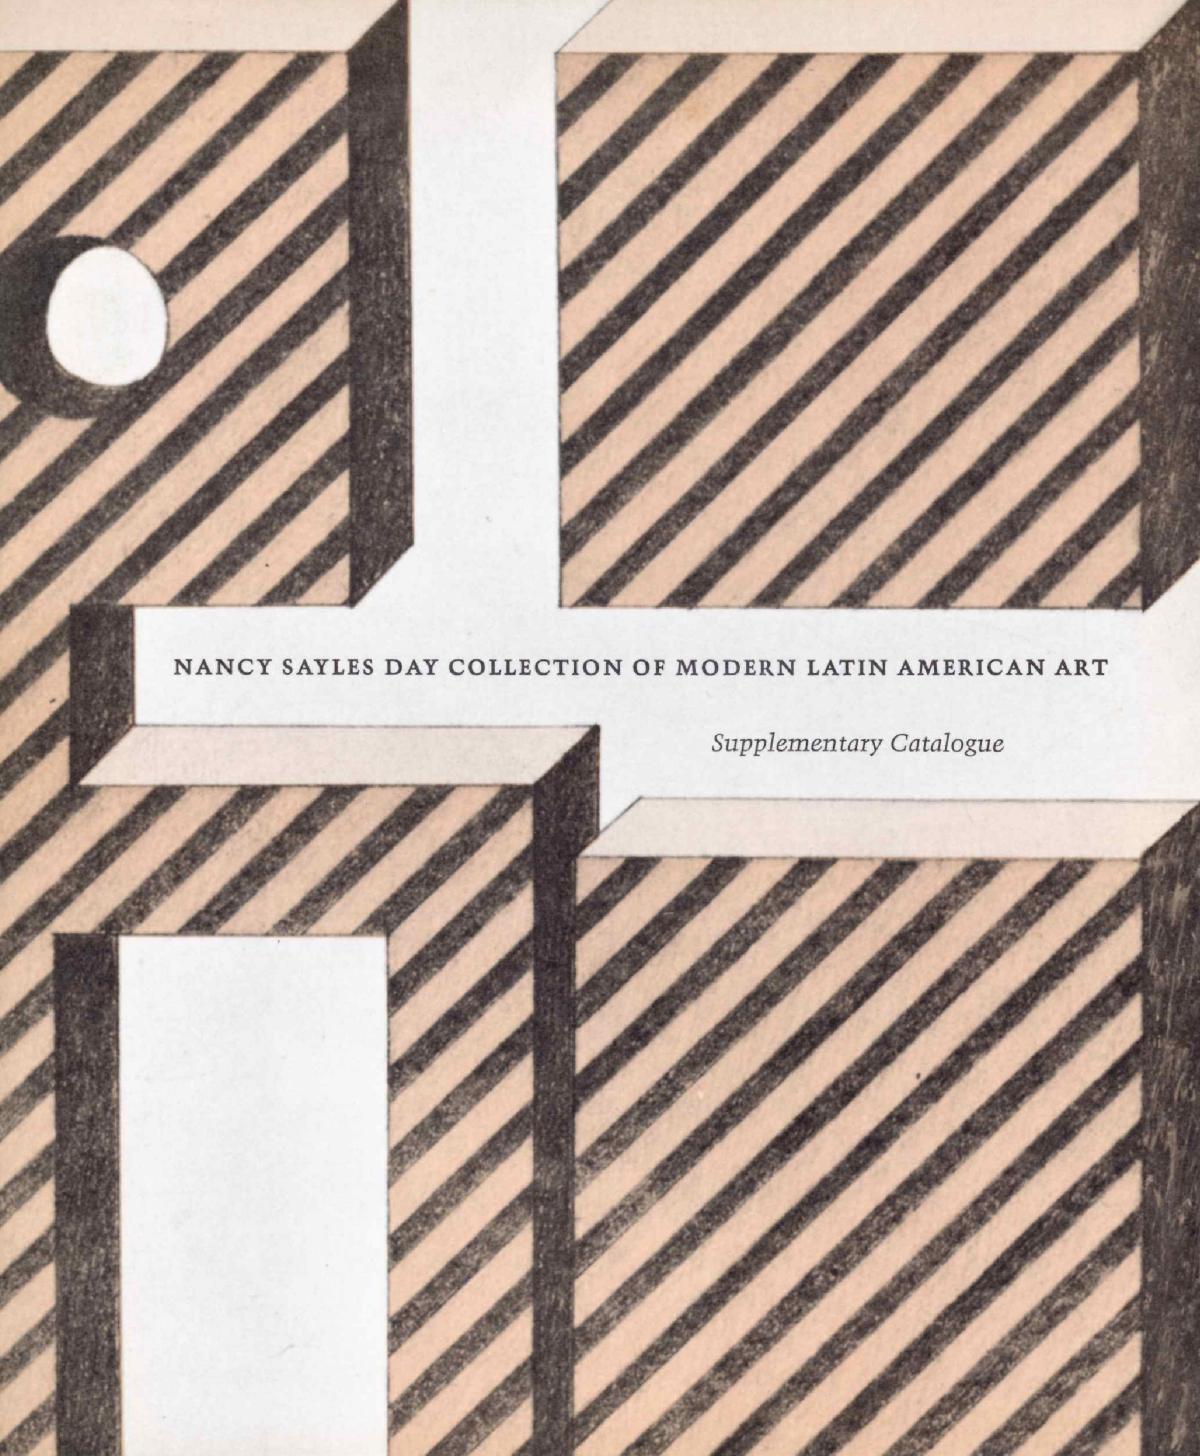 Nancy Sayles Day Collection of Modern Latin American Art, August-October 1968, exhibition catalogue